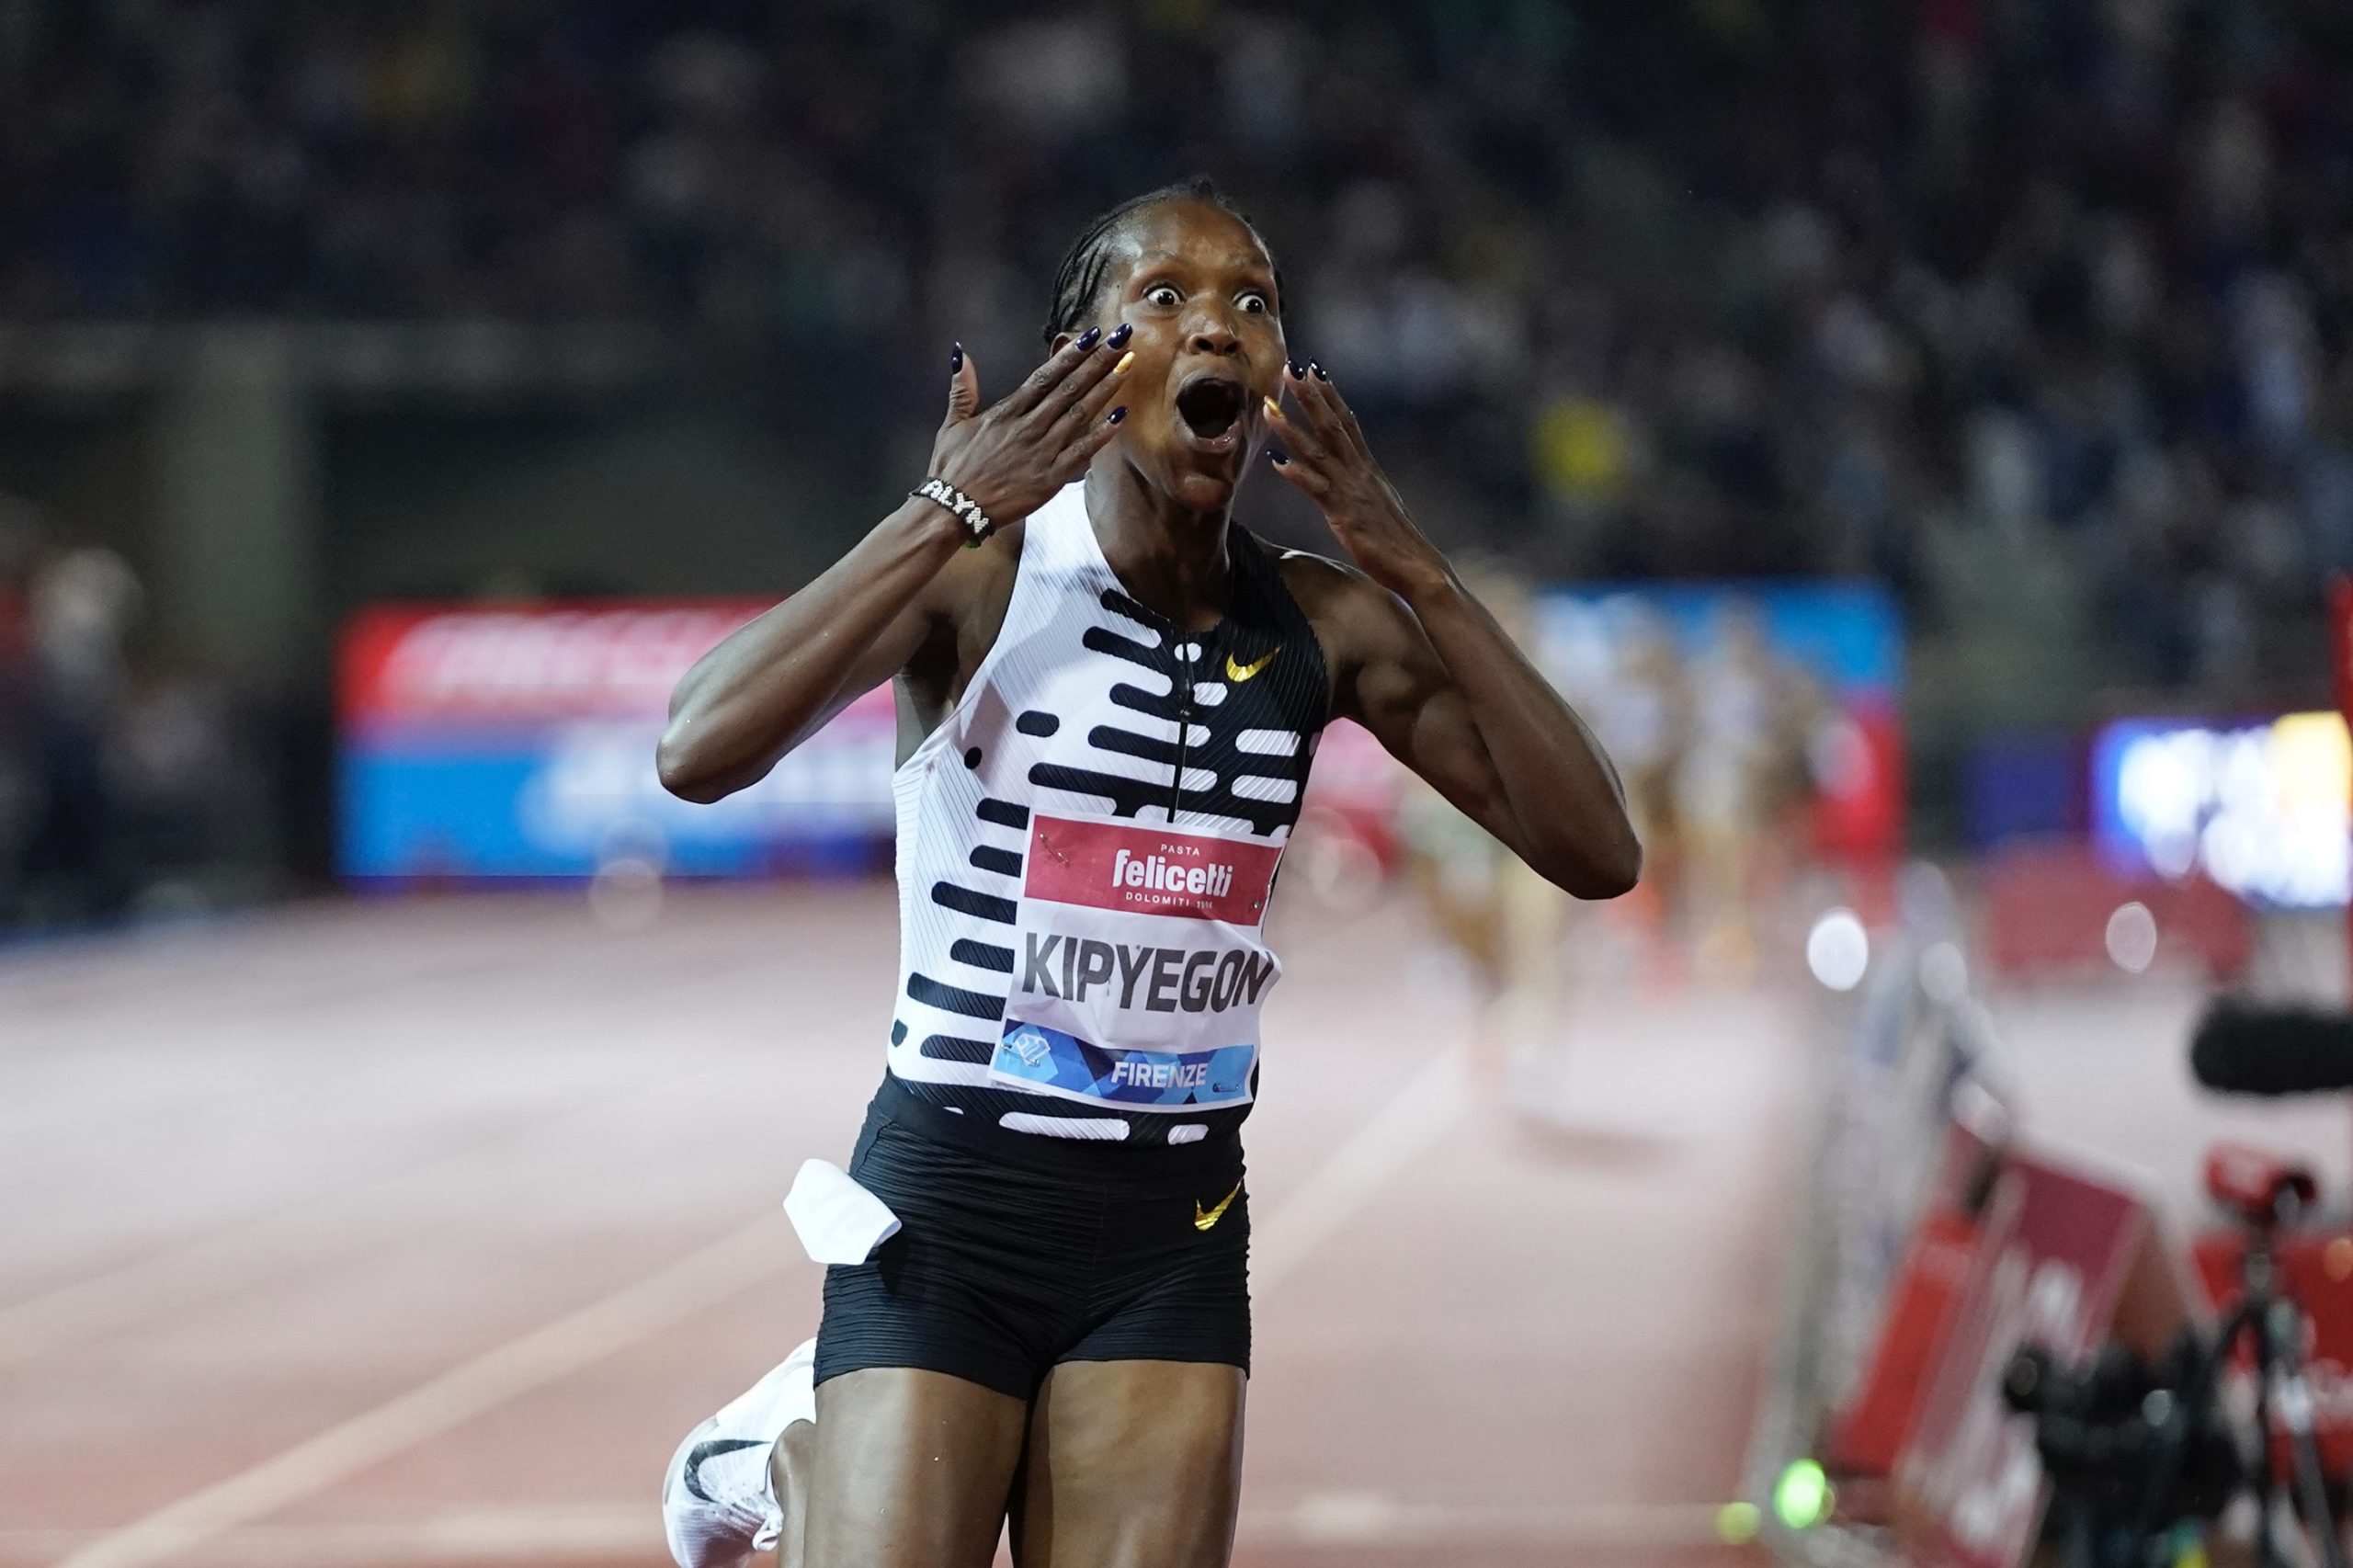 World Athletics Road Running Championships ---- Faith Kipyegon Becomes First Woman to Break 3:50 Barrier in Women's 1500m